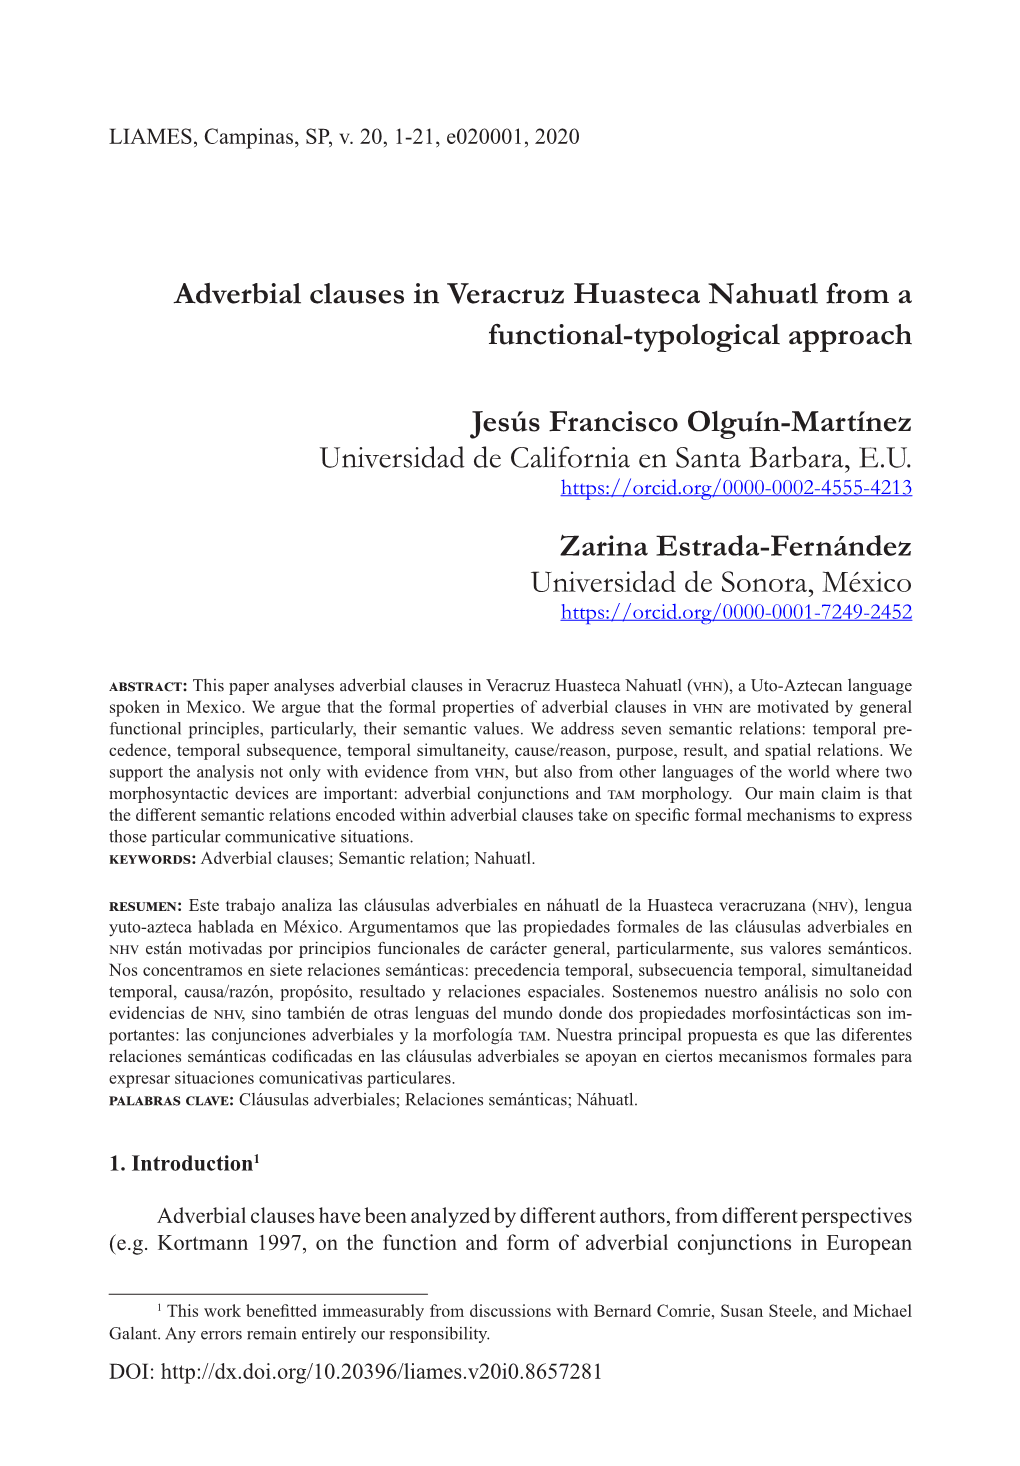 Adverbial Clauses in Veracruz Huasteca Nahuatl from a Functional-Typological Approach